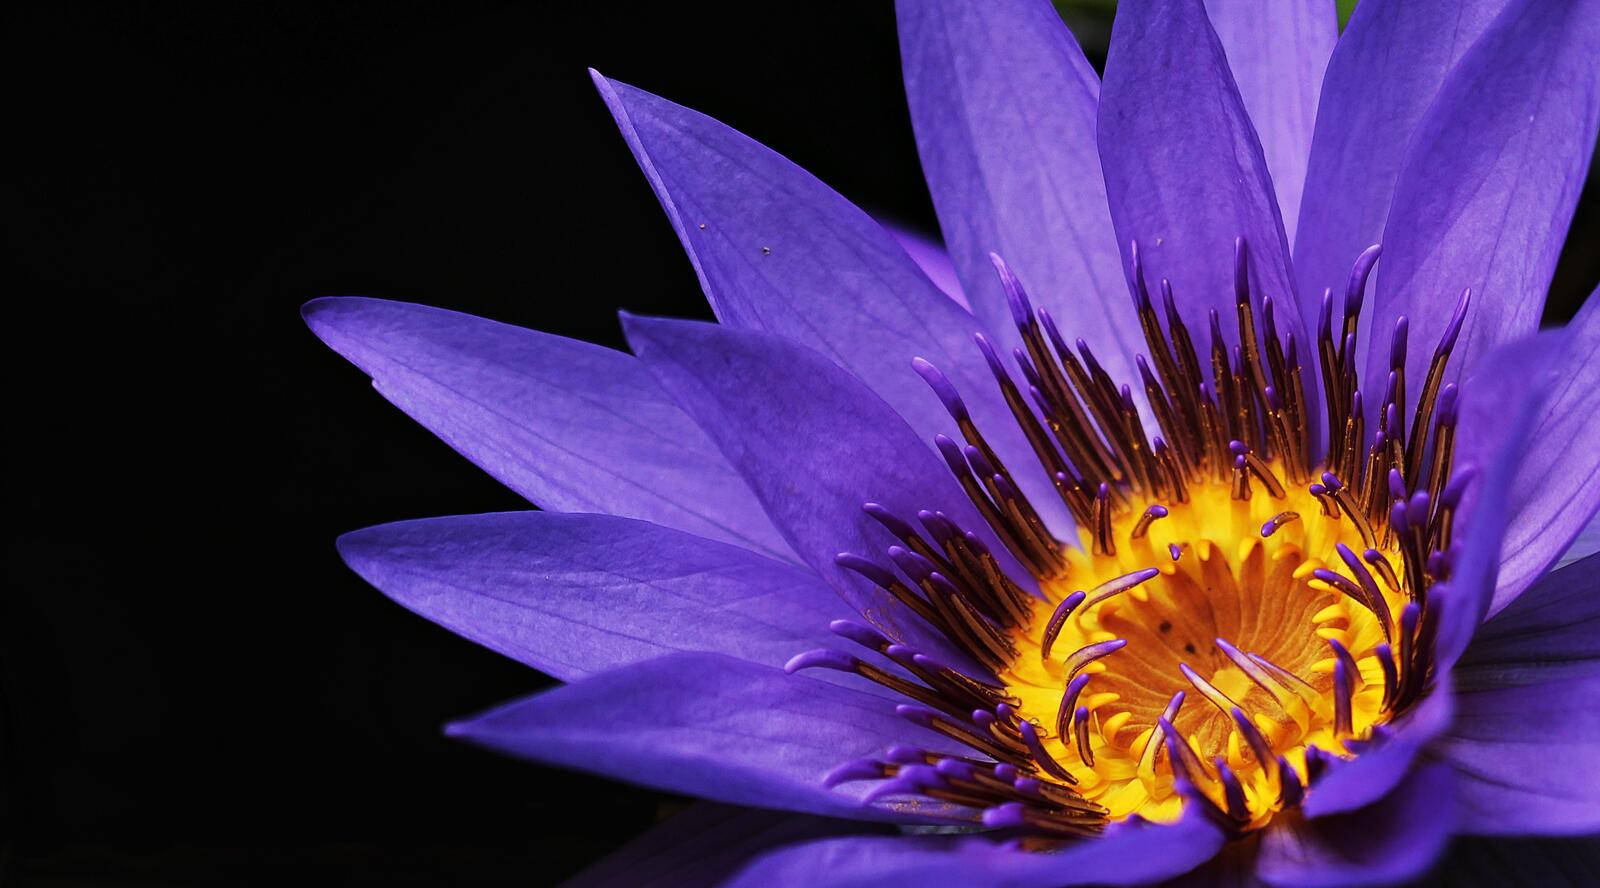 Wallpapers photos water lilies violet on the desktop